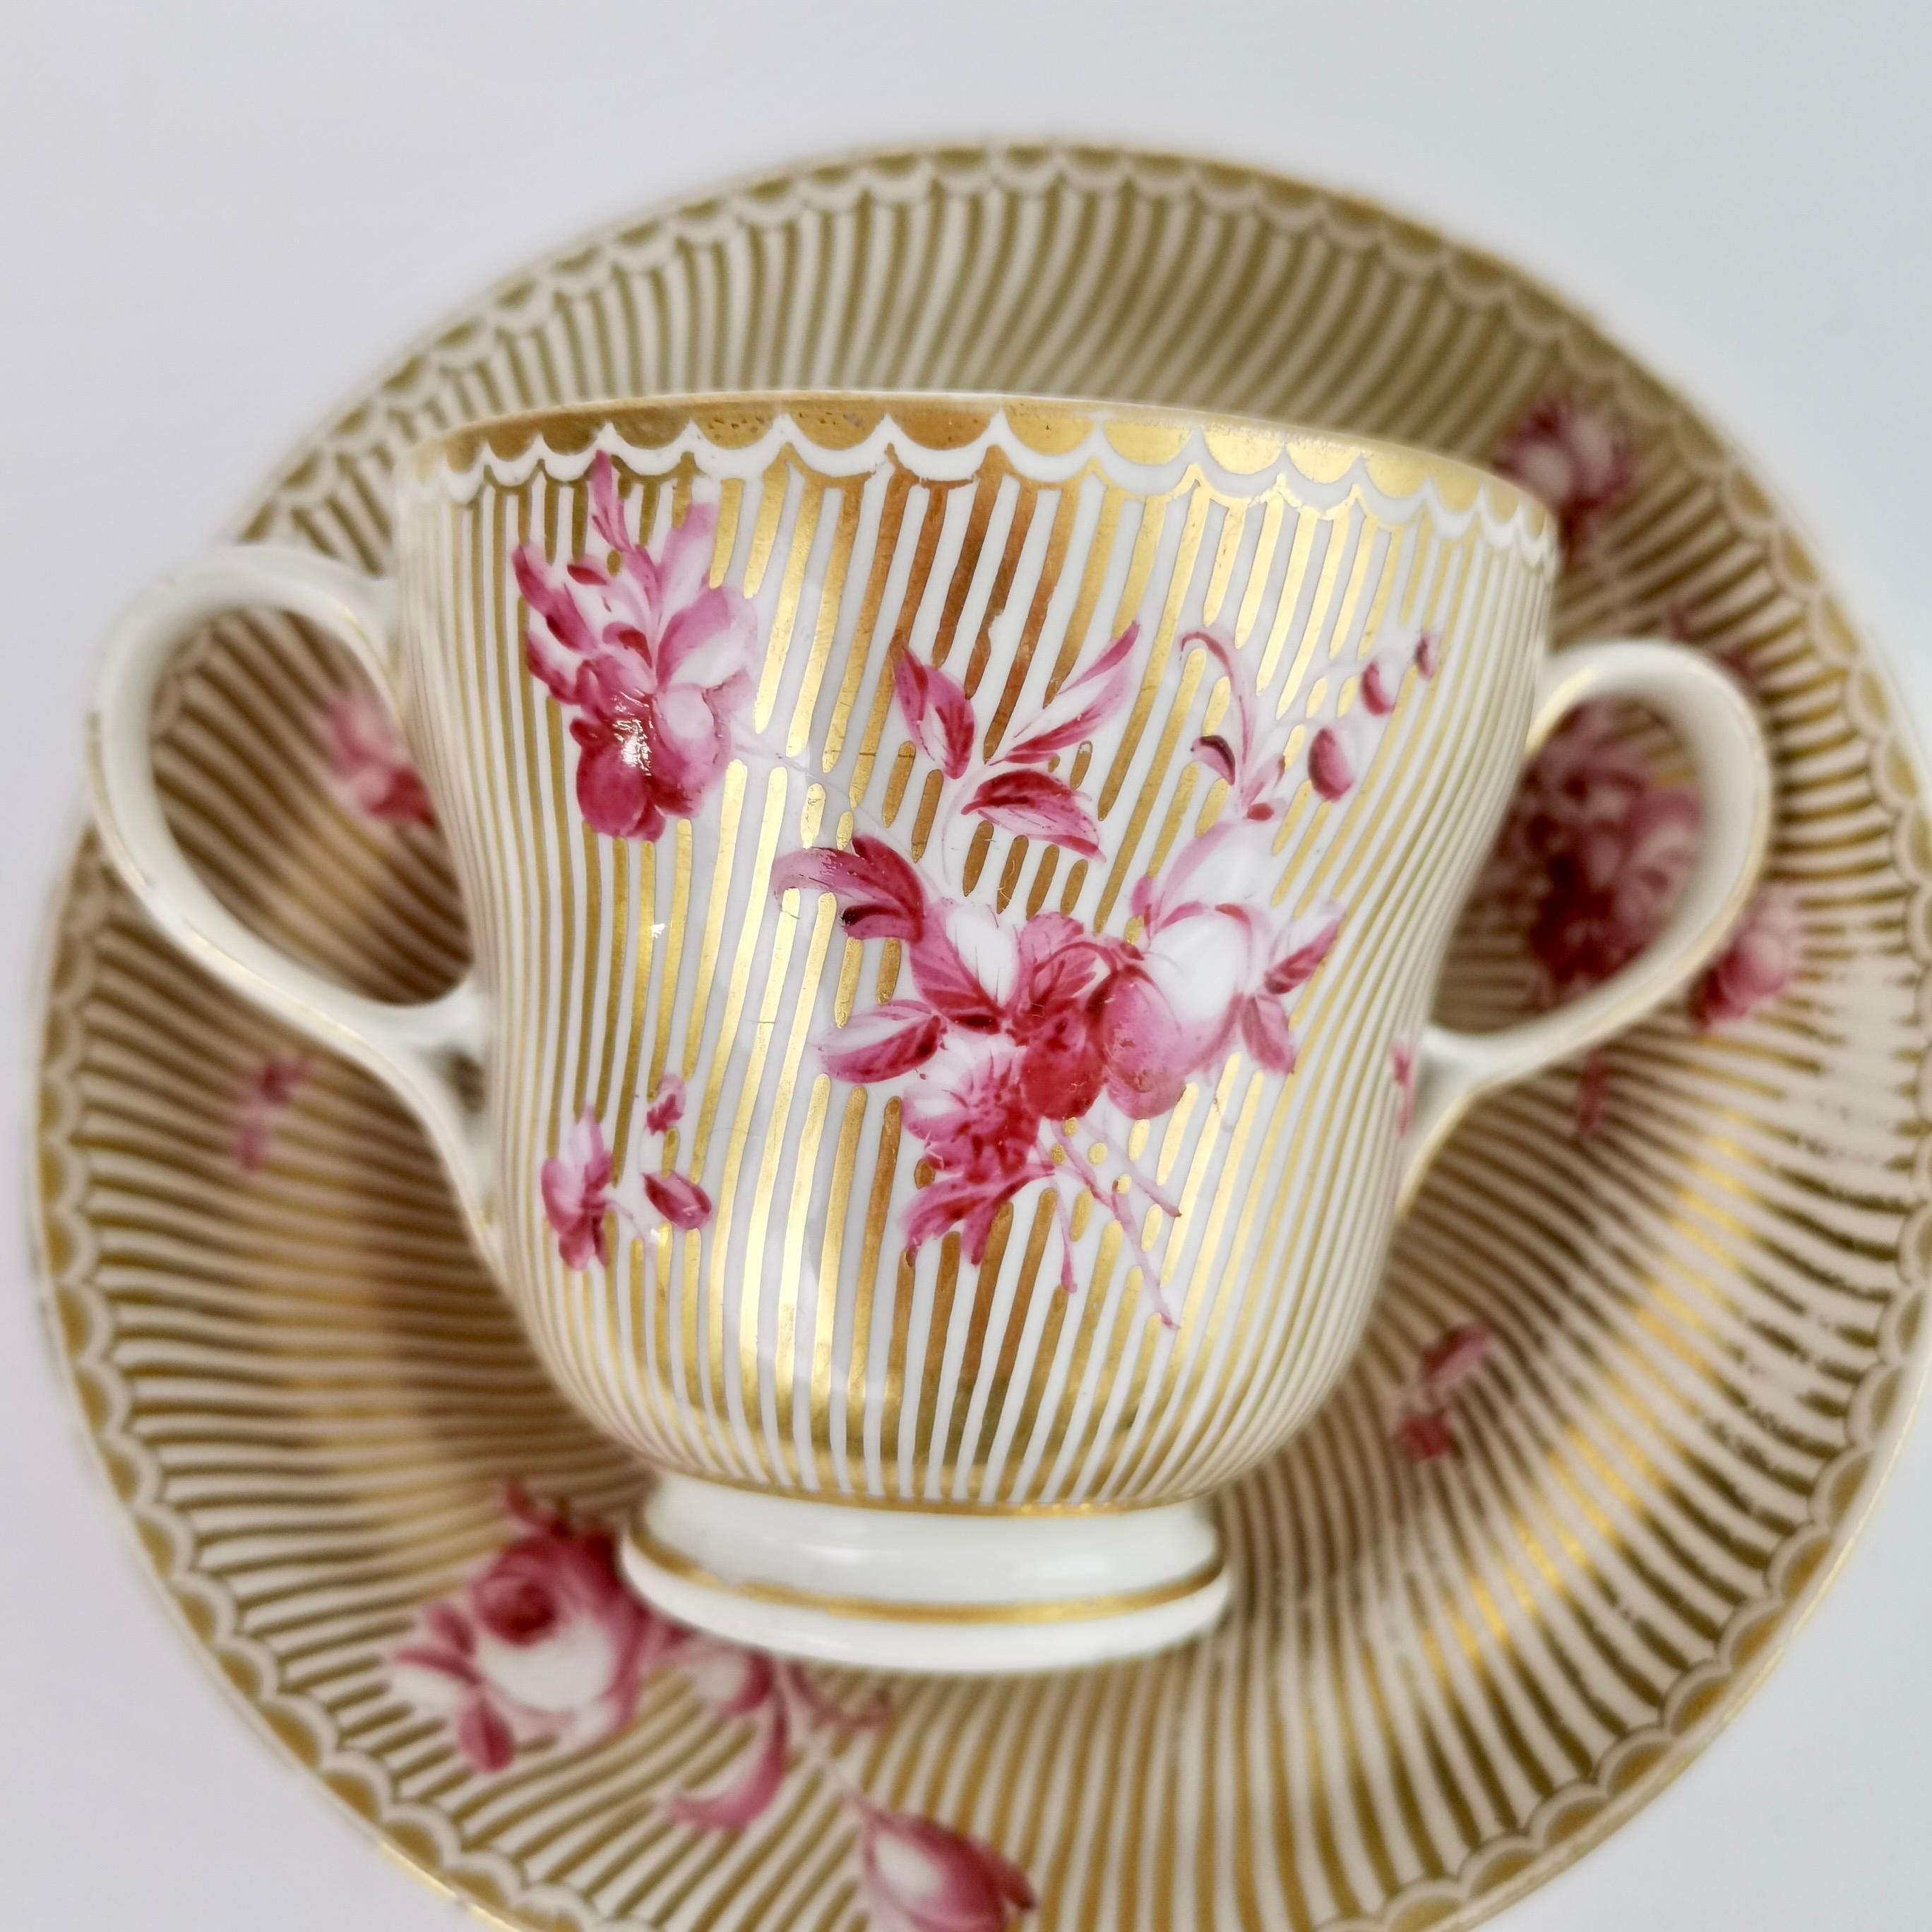 Chelsea-Derby Chocolate Cup Set, Gilt Stripes, Puce Flowers, Rococo 1770-1775 In Good Condition For Sale In London, GB